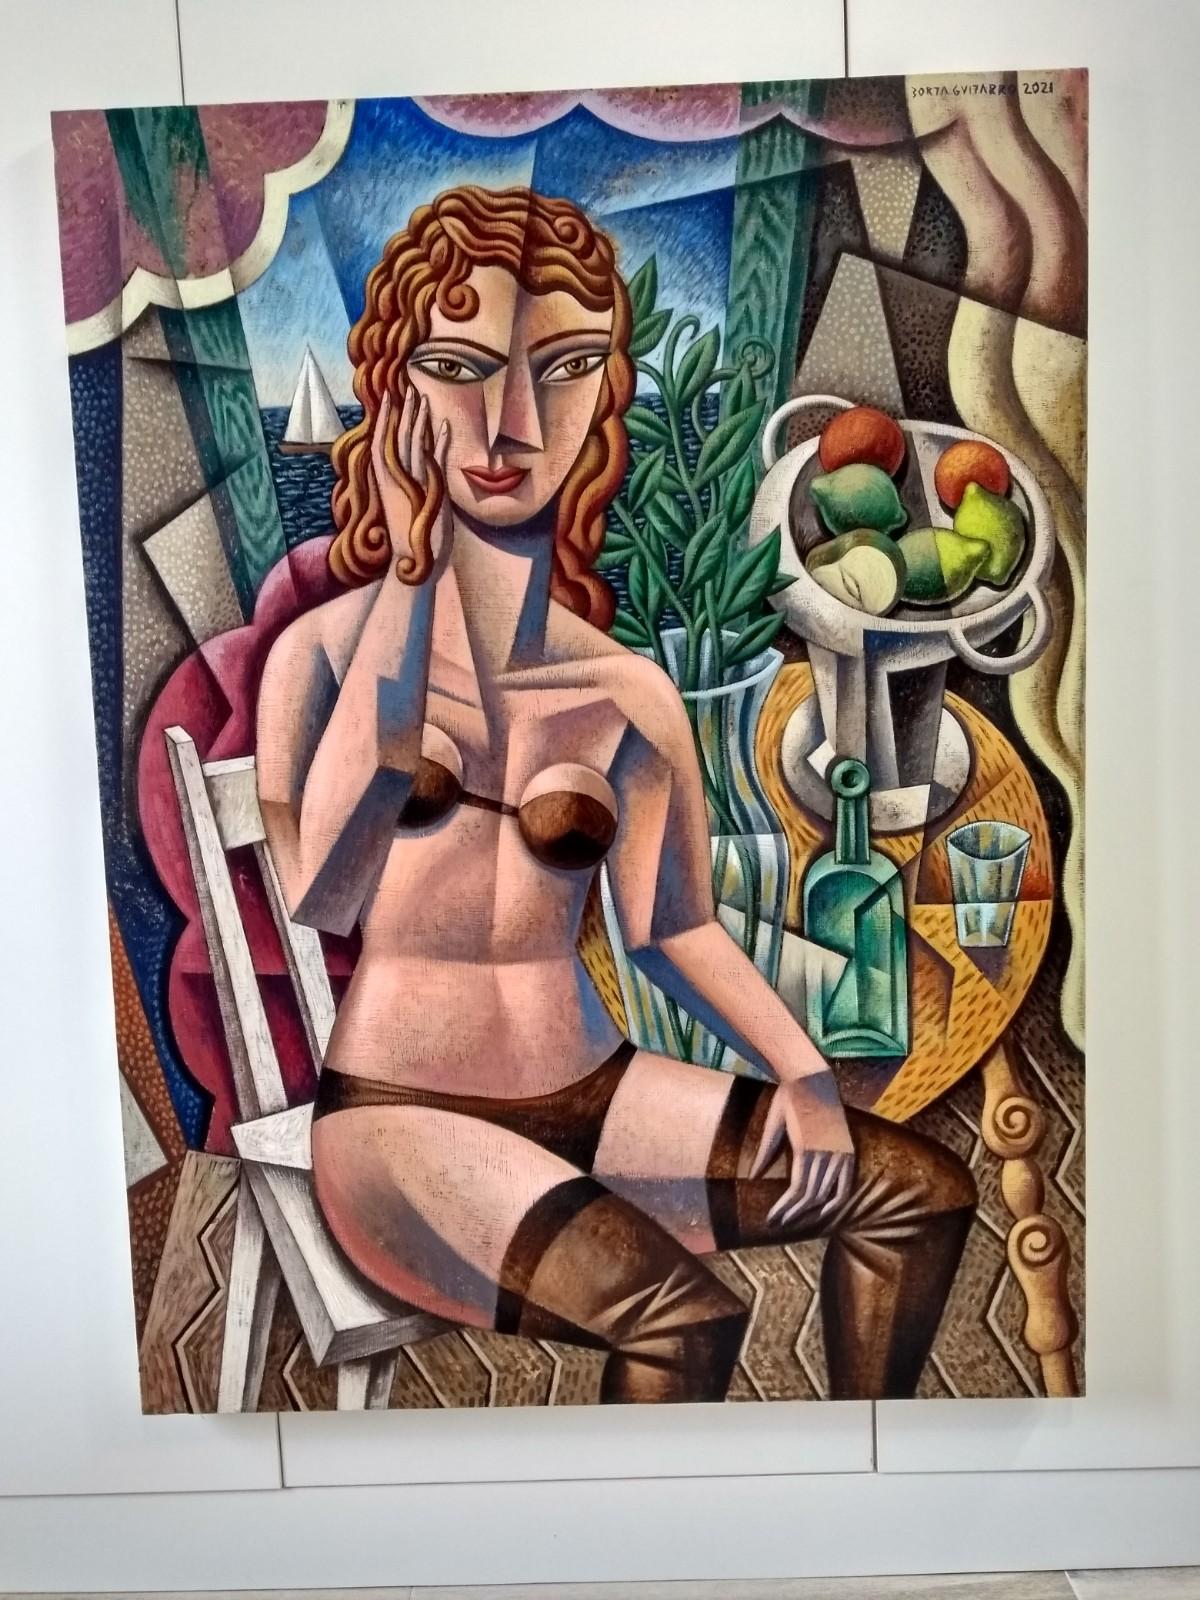 Mujer Cubista - original modern female figure human form abstract cubism acrylic - Painting by Borja Guijarro